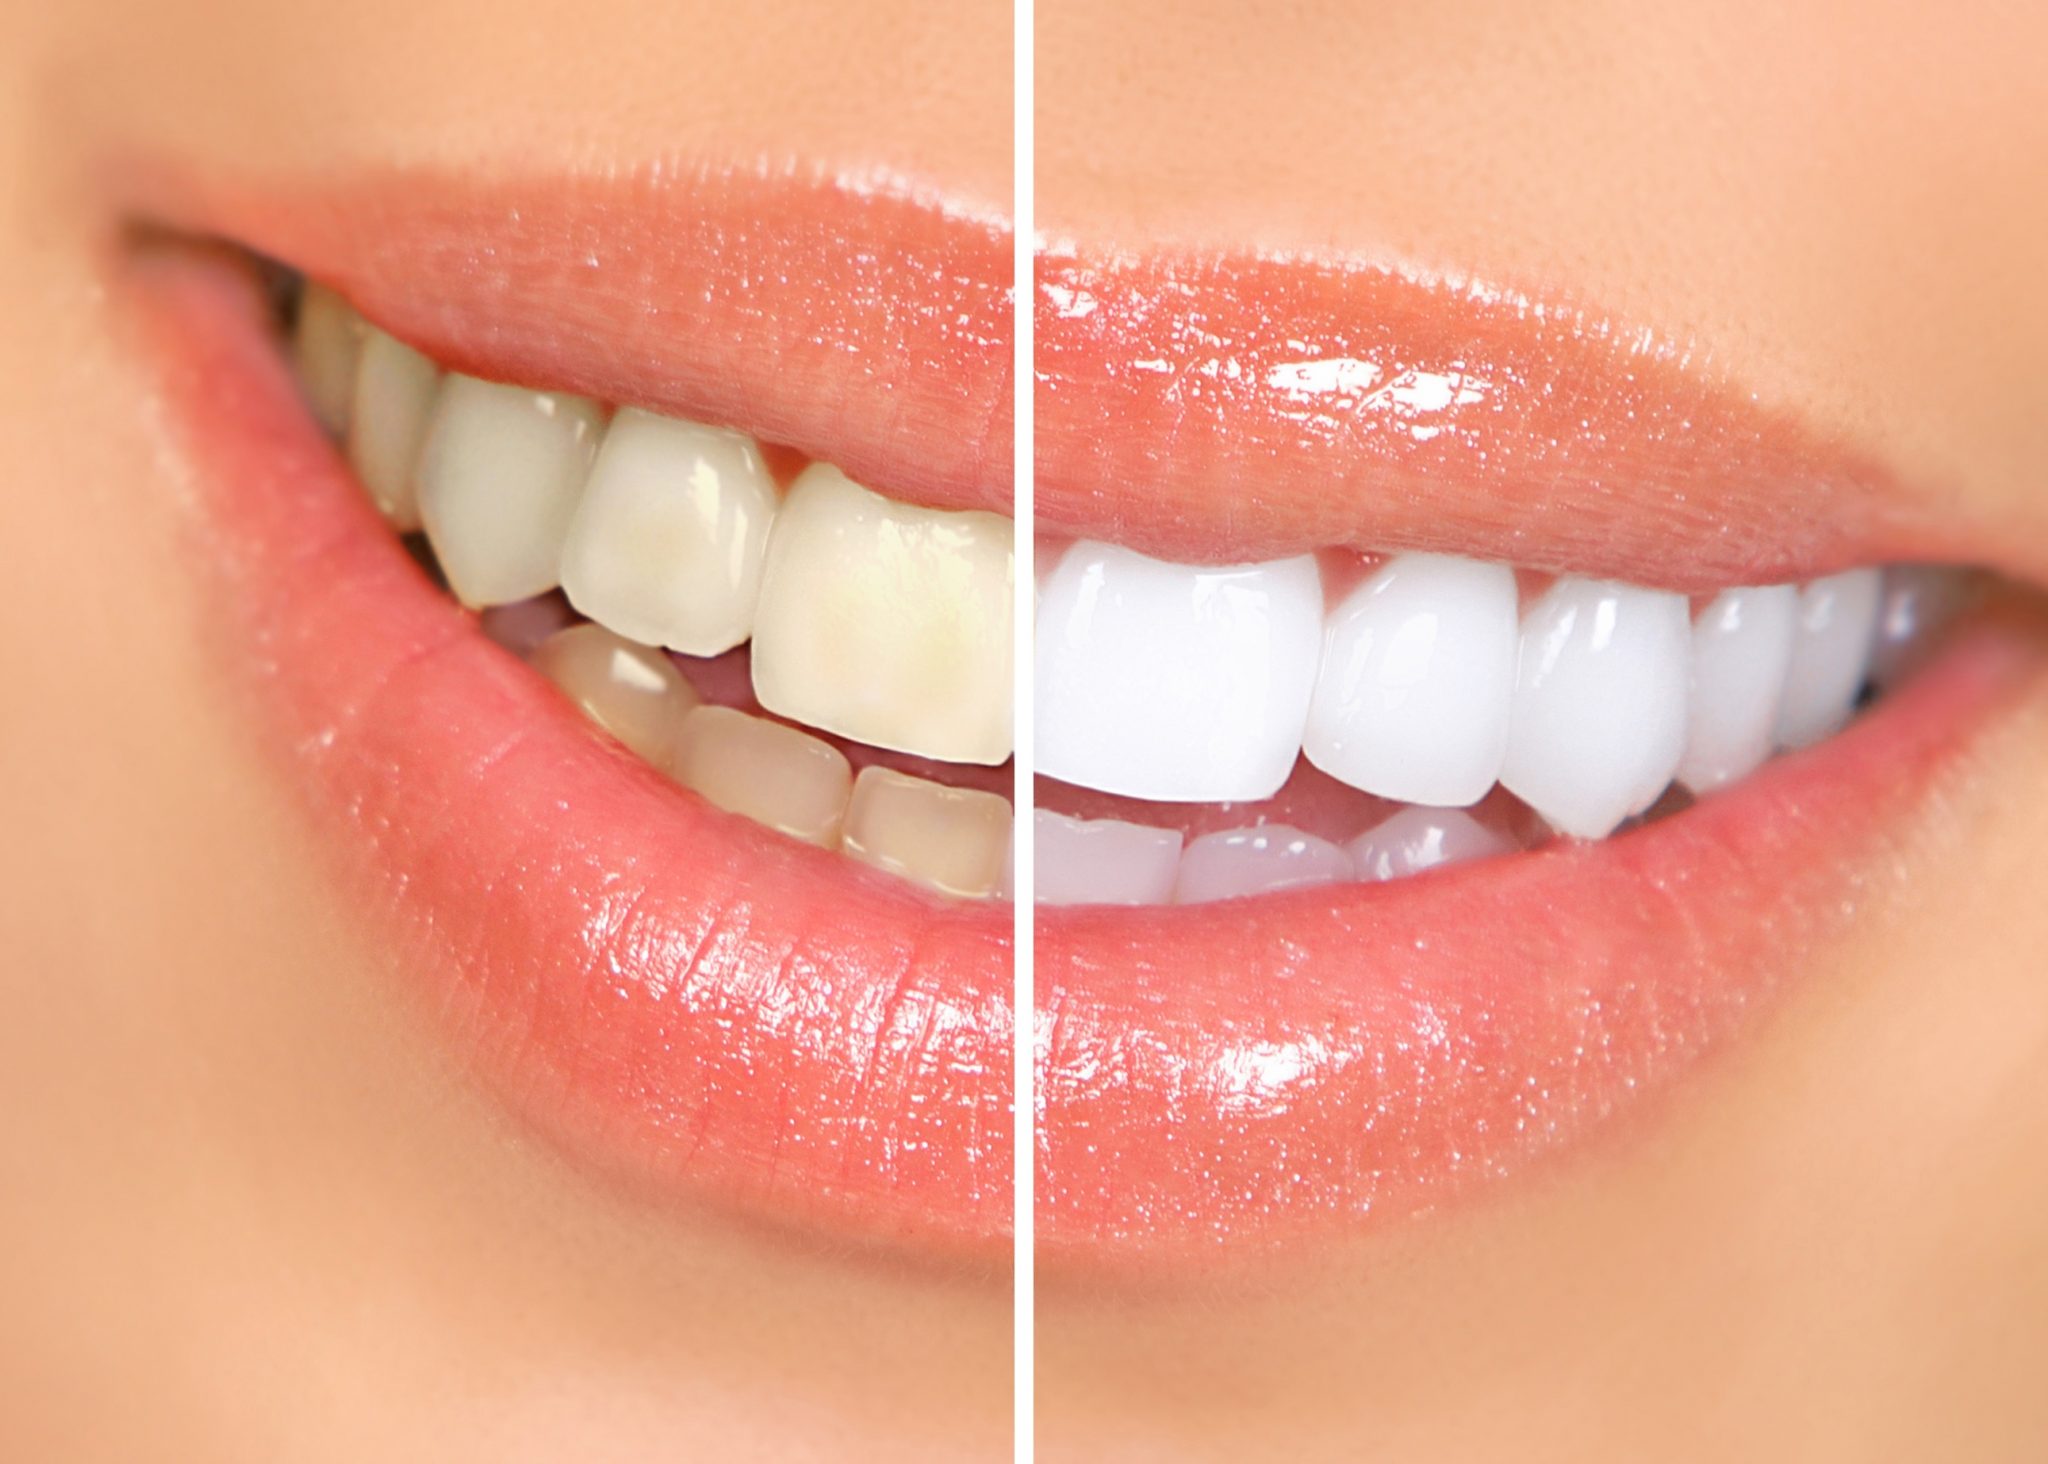 5 Unique Natural Remedies For Getting Those Pearly Whites